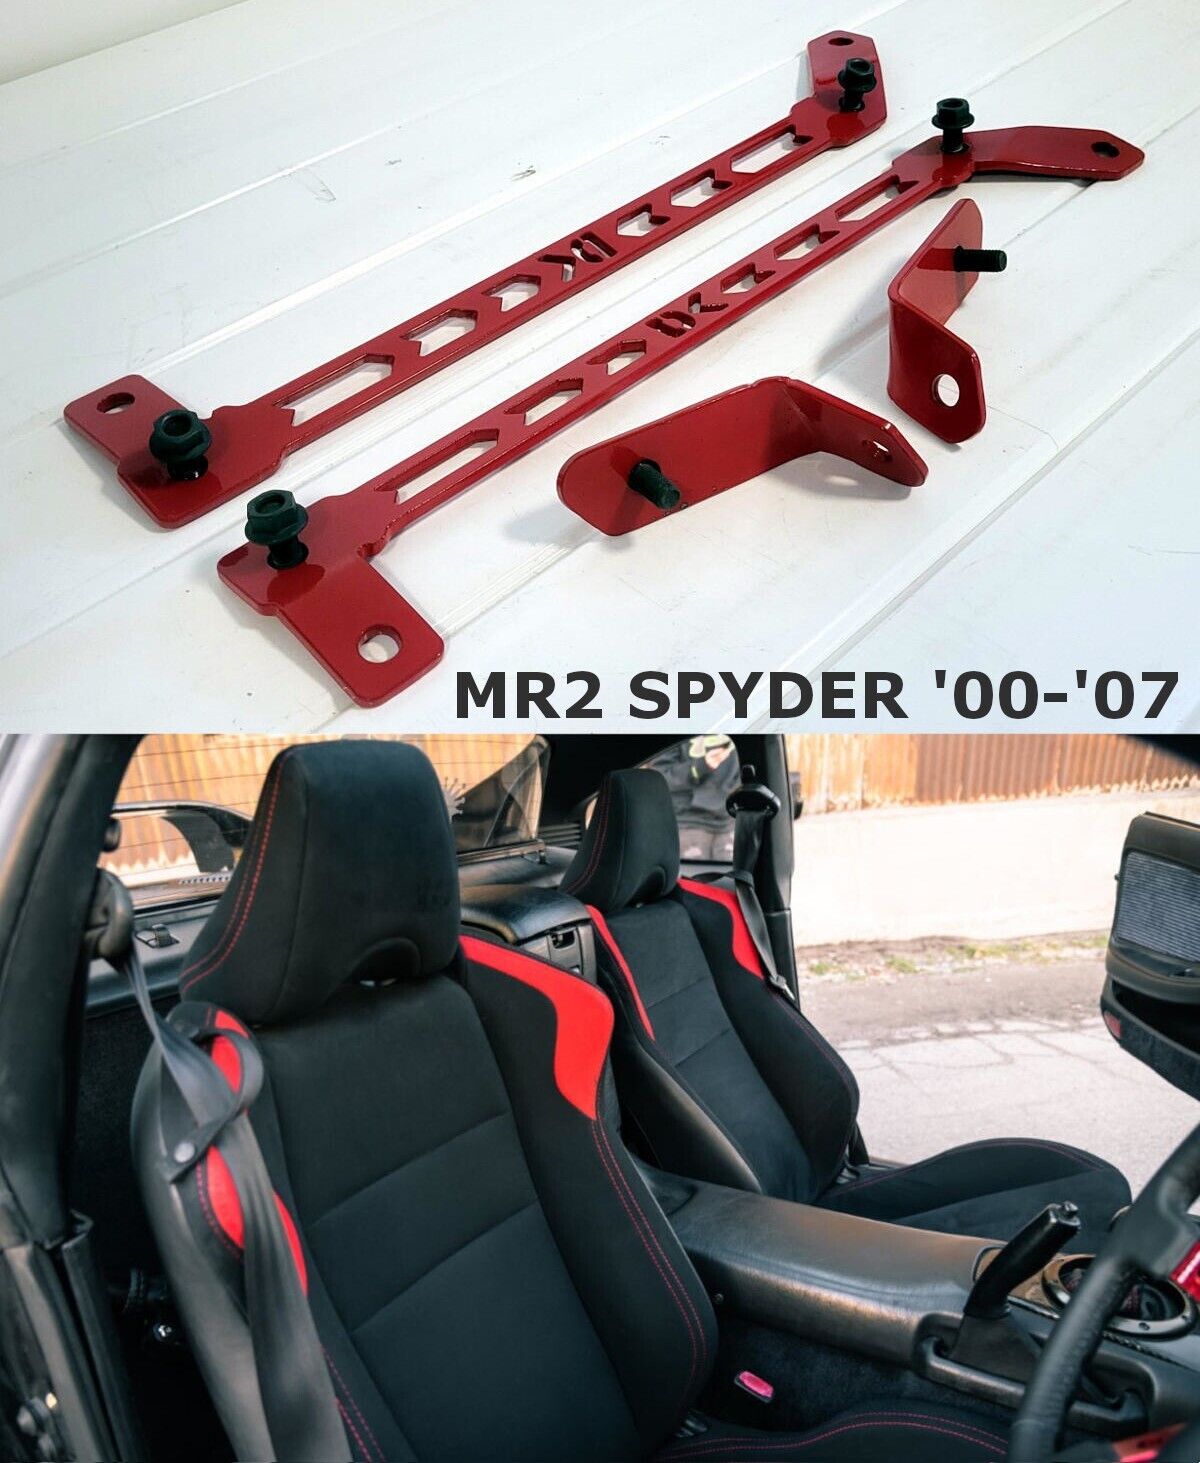 BRZ/FRS/GT86 SEAT CONVERSION KIT (RED) FOR 2000-2007 TOYOTA MR2 SPYDER ZZW30